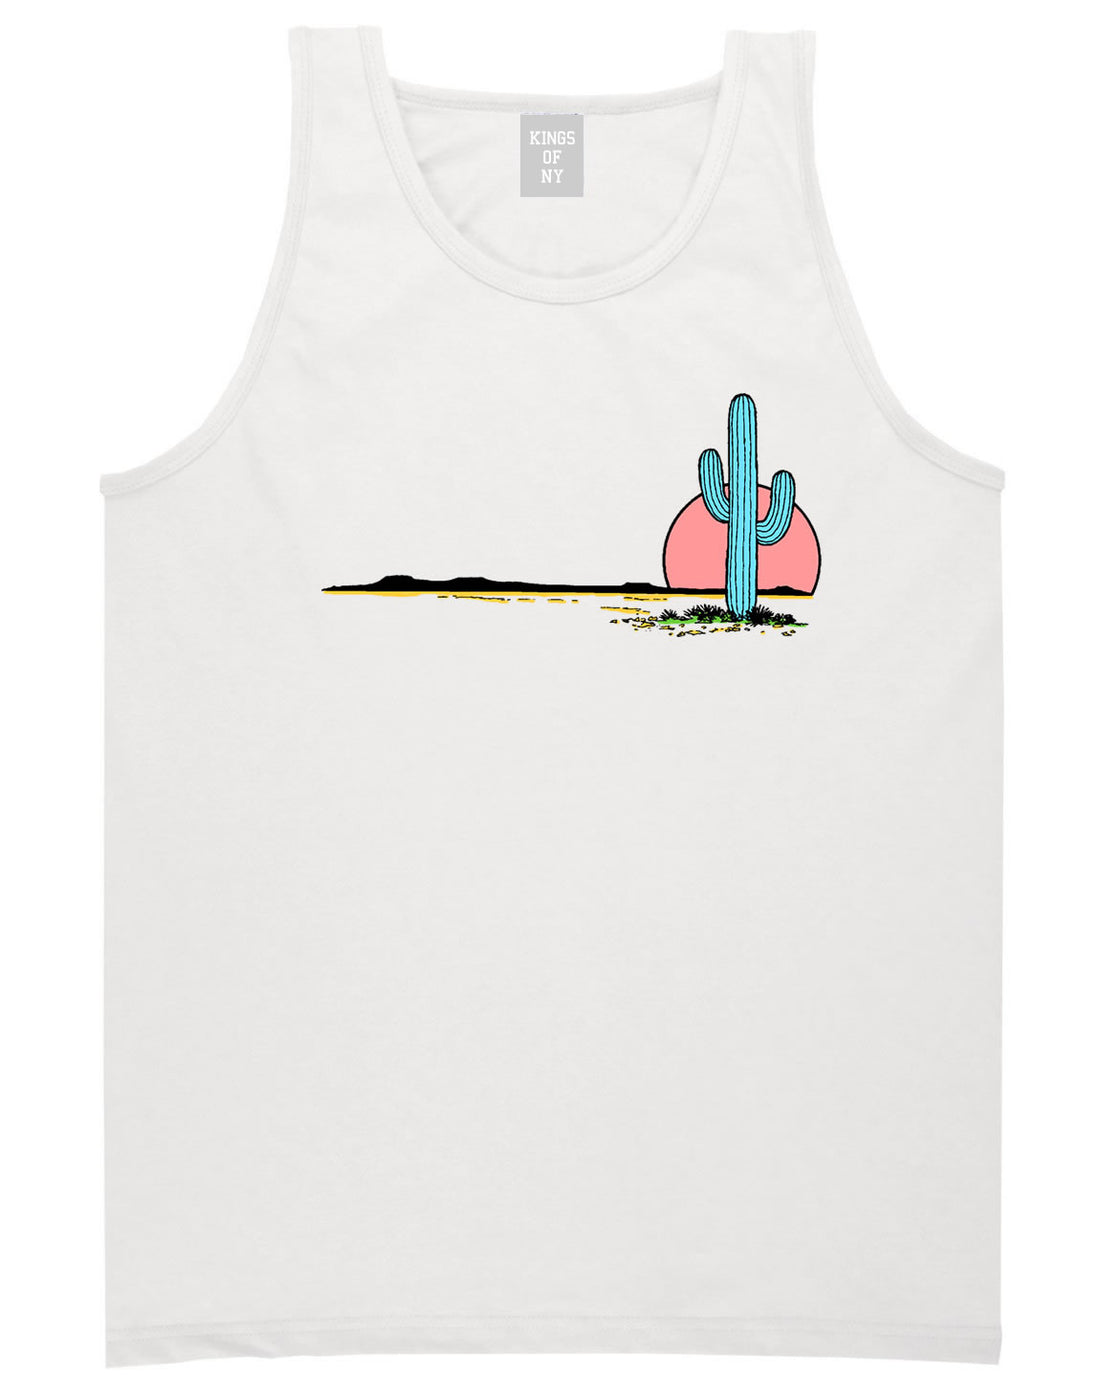 Cactus Sunrise Tank Top By Kings Of NY